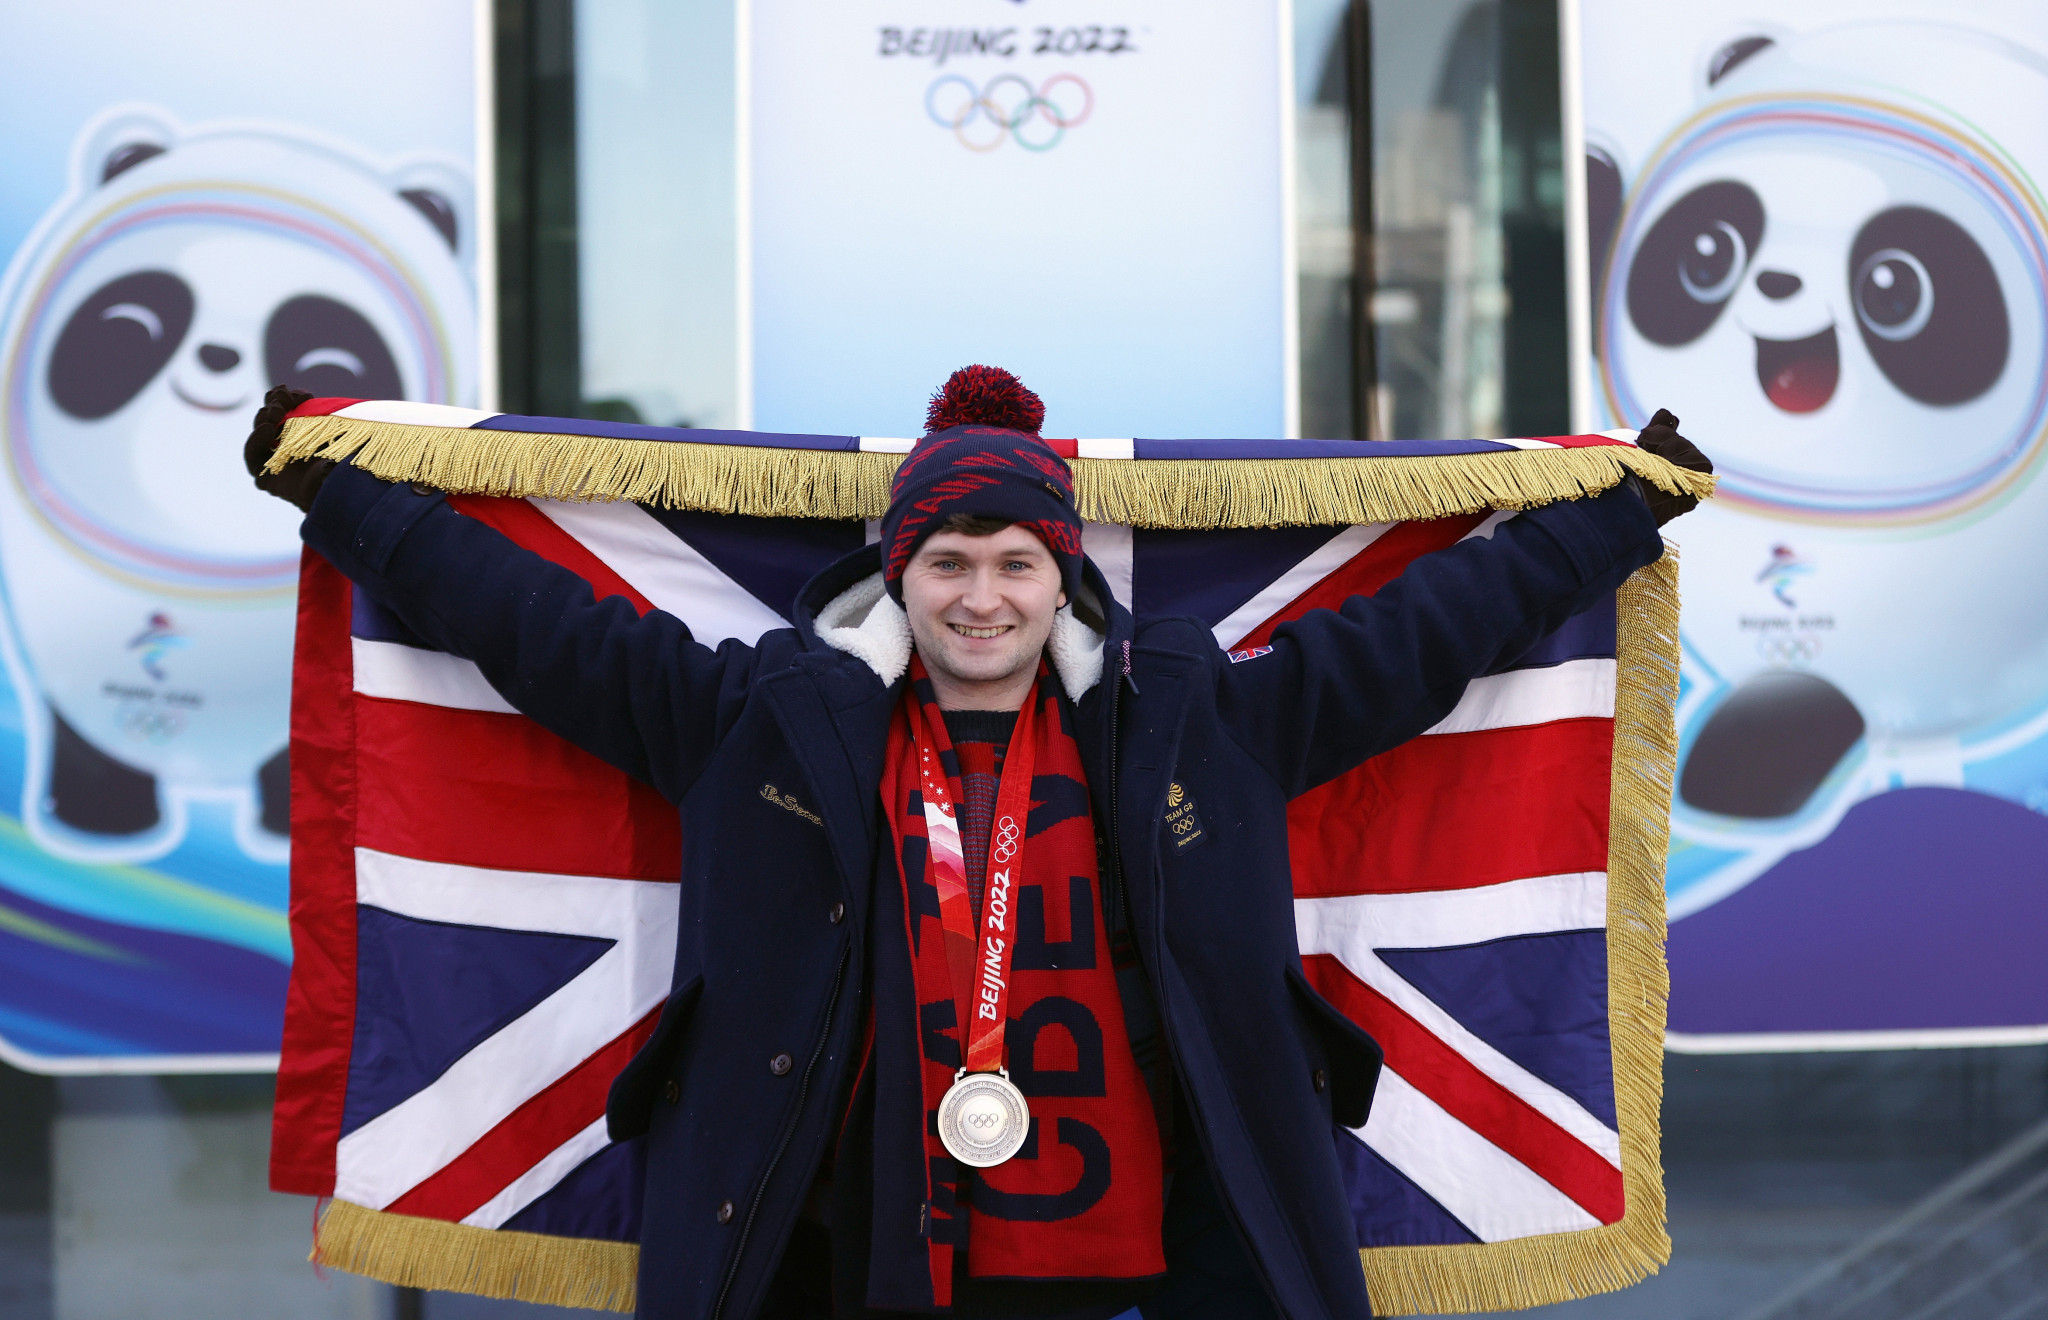 Curling silver medallist Mouat to carry British flag at Beijing 2022 Closing Ceremony 